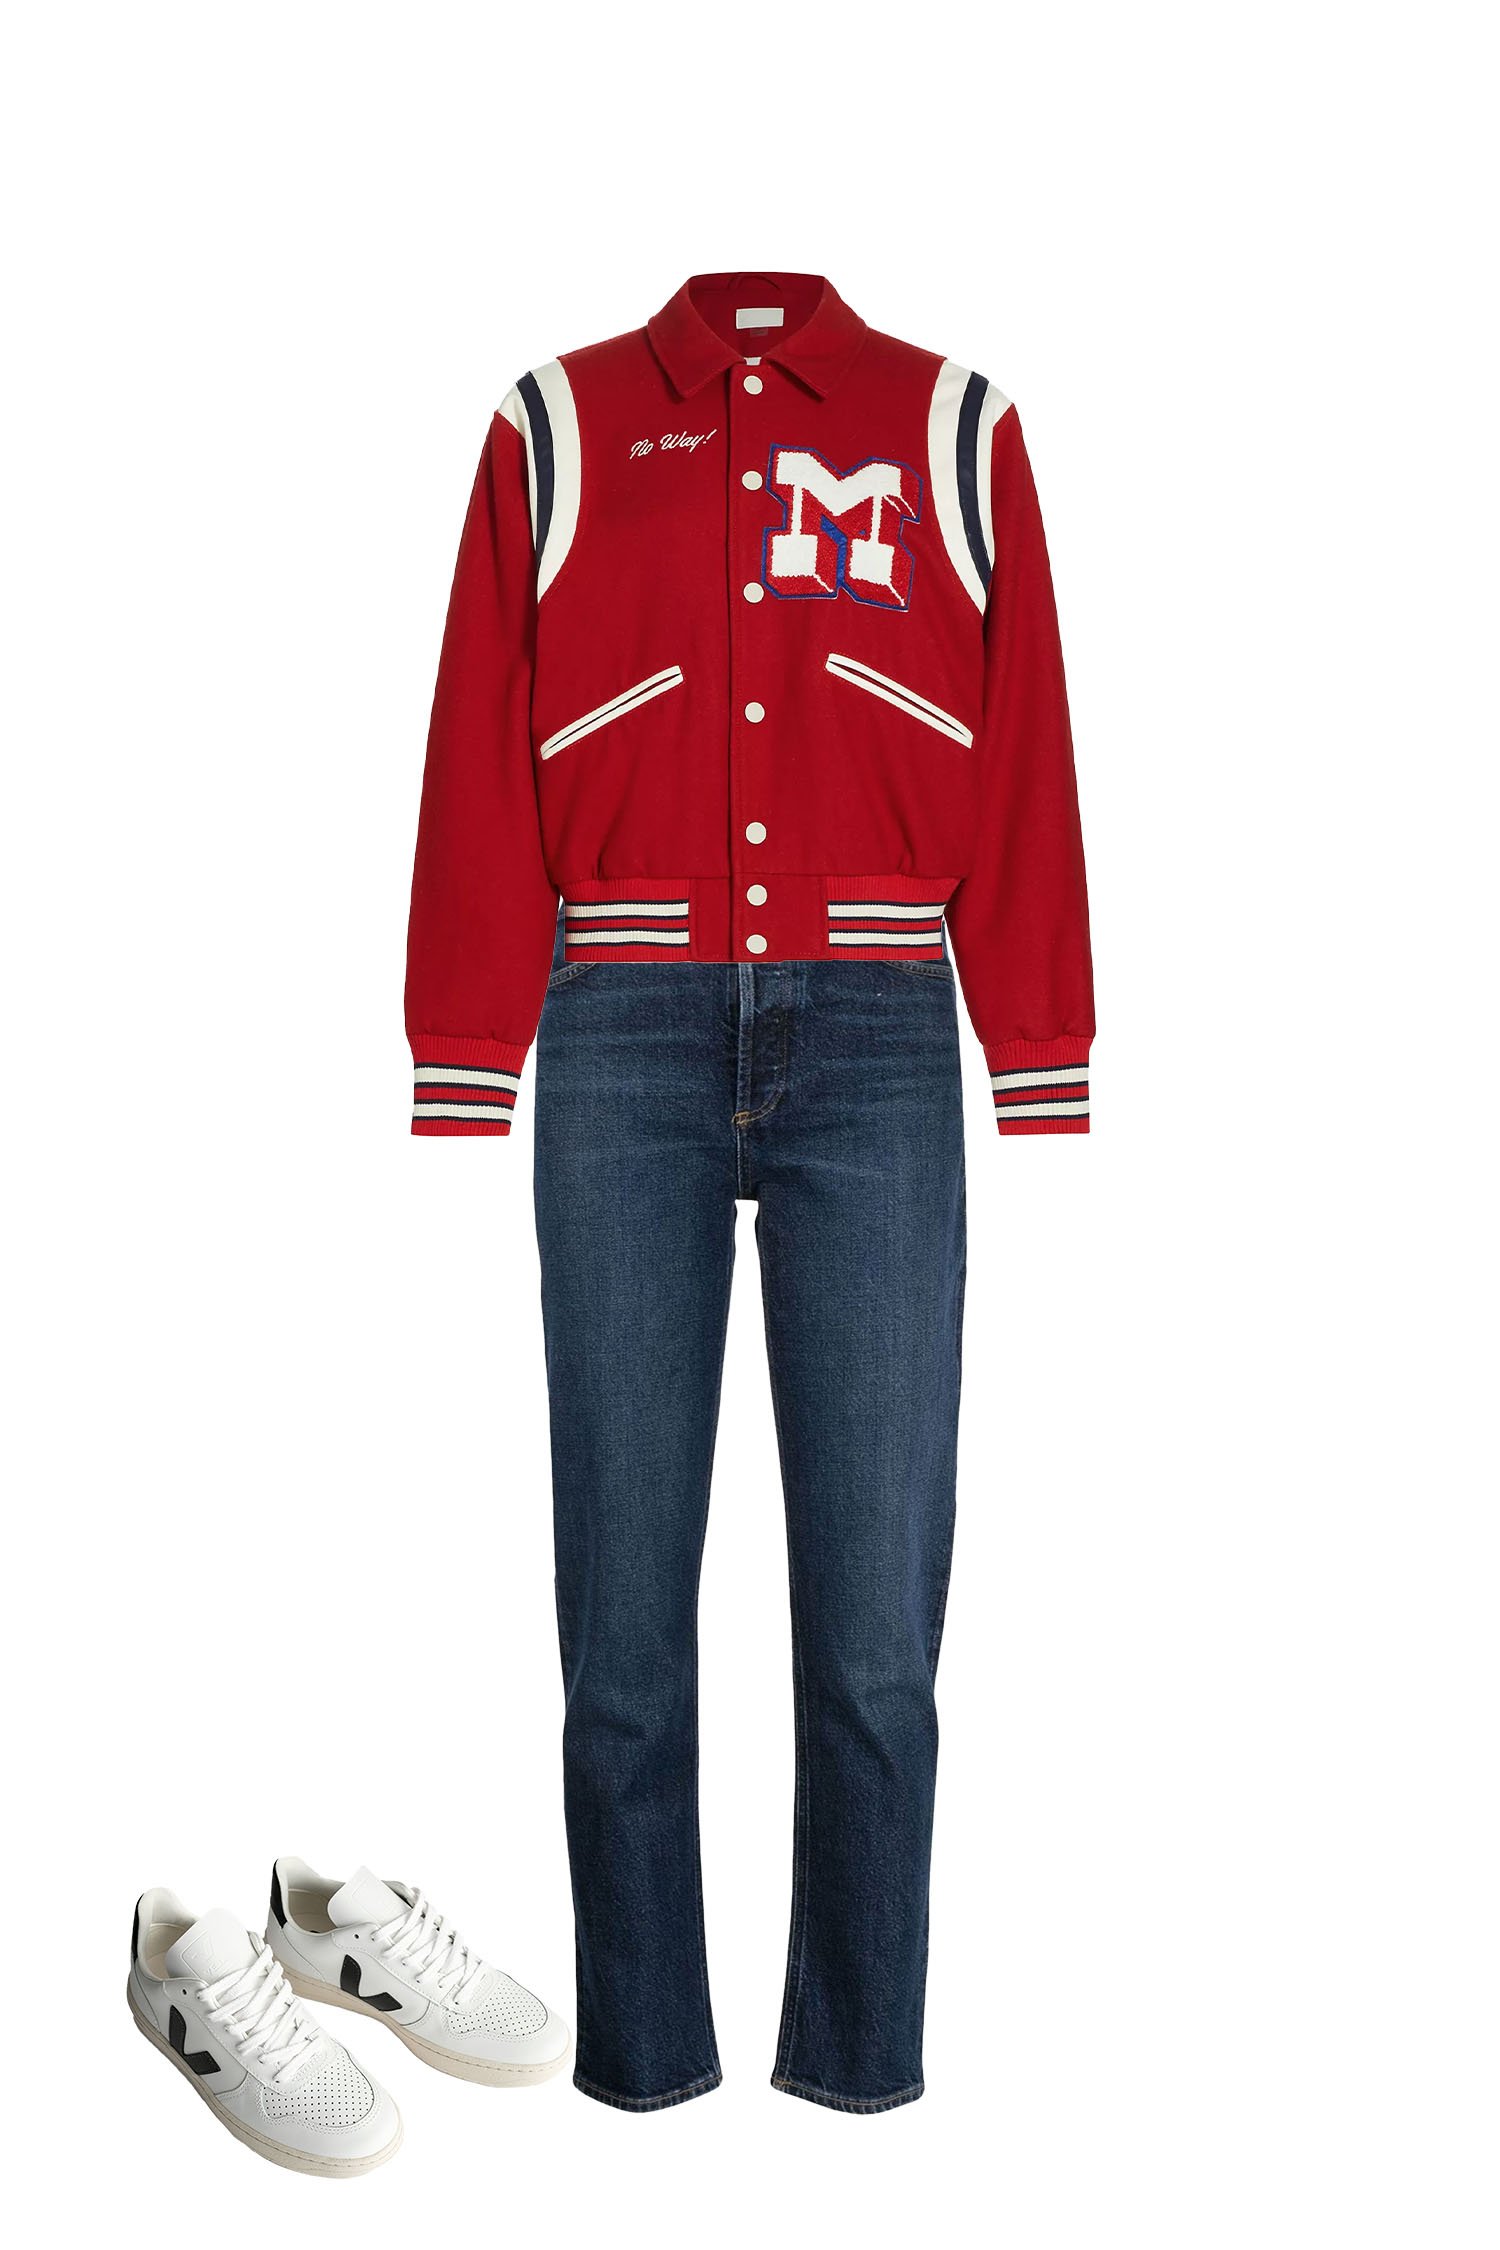 High Rise Straight Leg Jeans - Red Varsity Jacket - White Sneakers